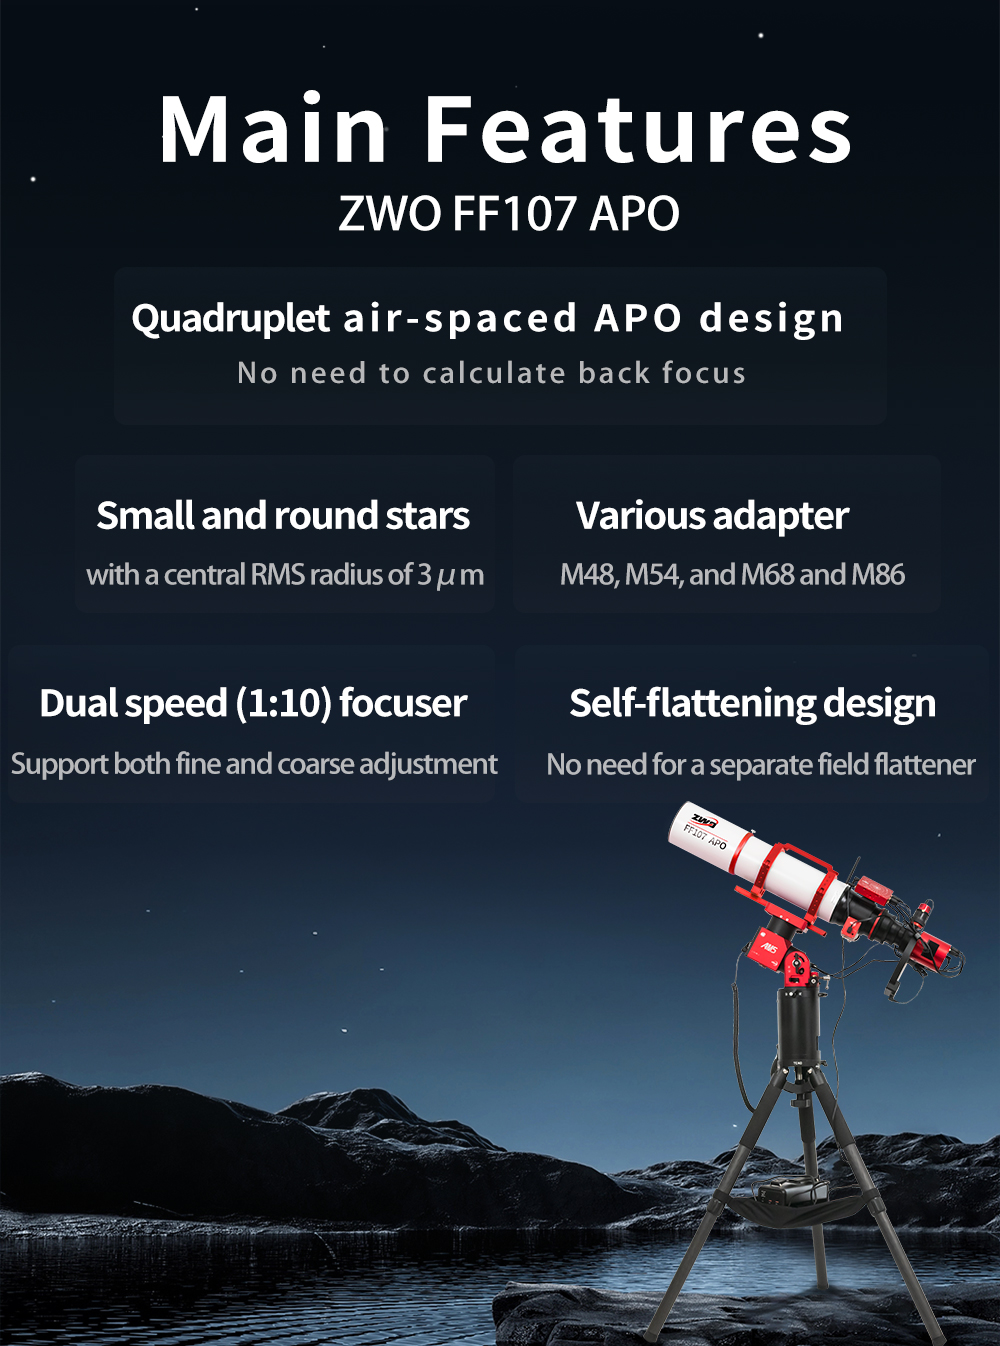  The FF107 is a transportable APO refractor for astrophotography with corrected field of view up to full frame sensor and for observation up to the highest magnification range. [EN] 